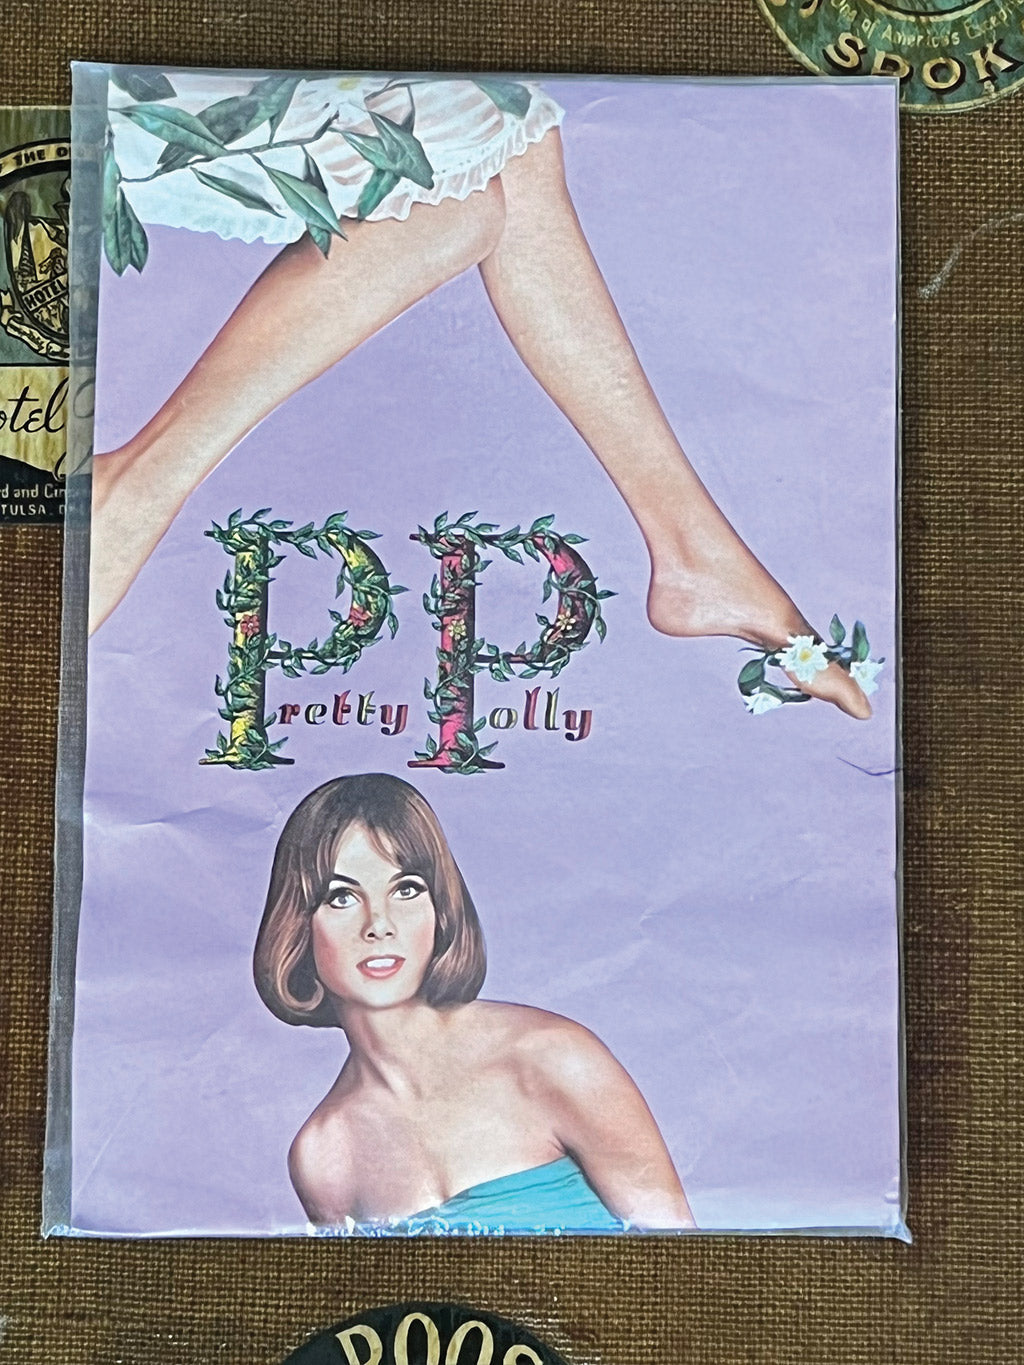 Vintage Pretty Polly Tendrelle Stockings back